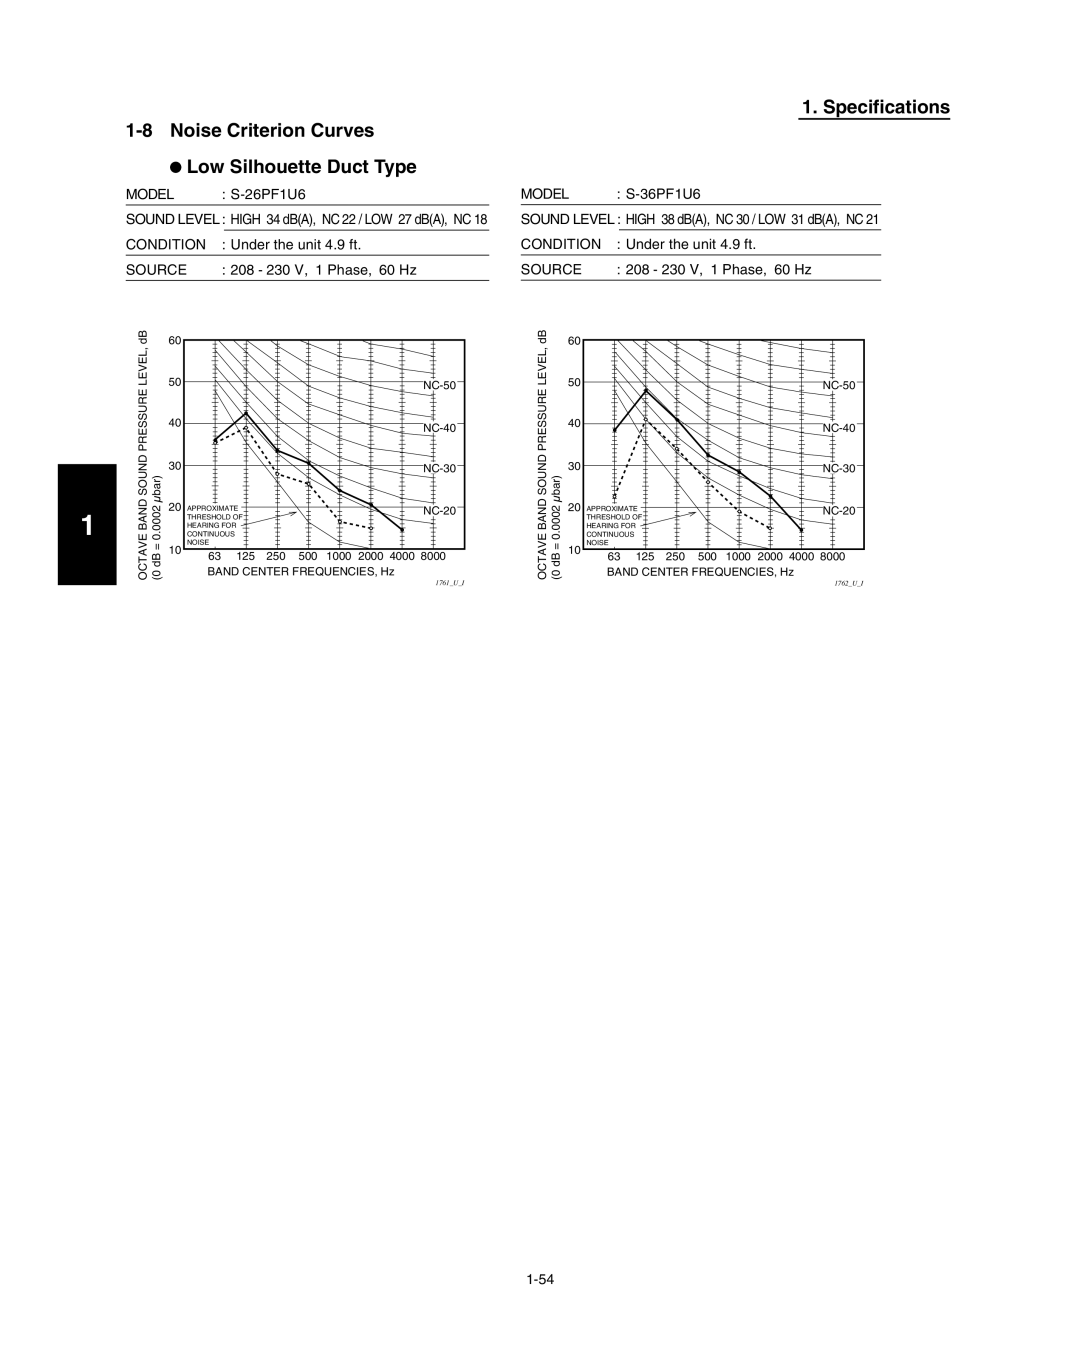 Panasonic R410A service manual 1-8Noise Criterion Curves, Low Silhouette Duct Type, Specifications 